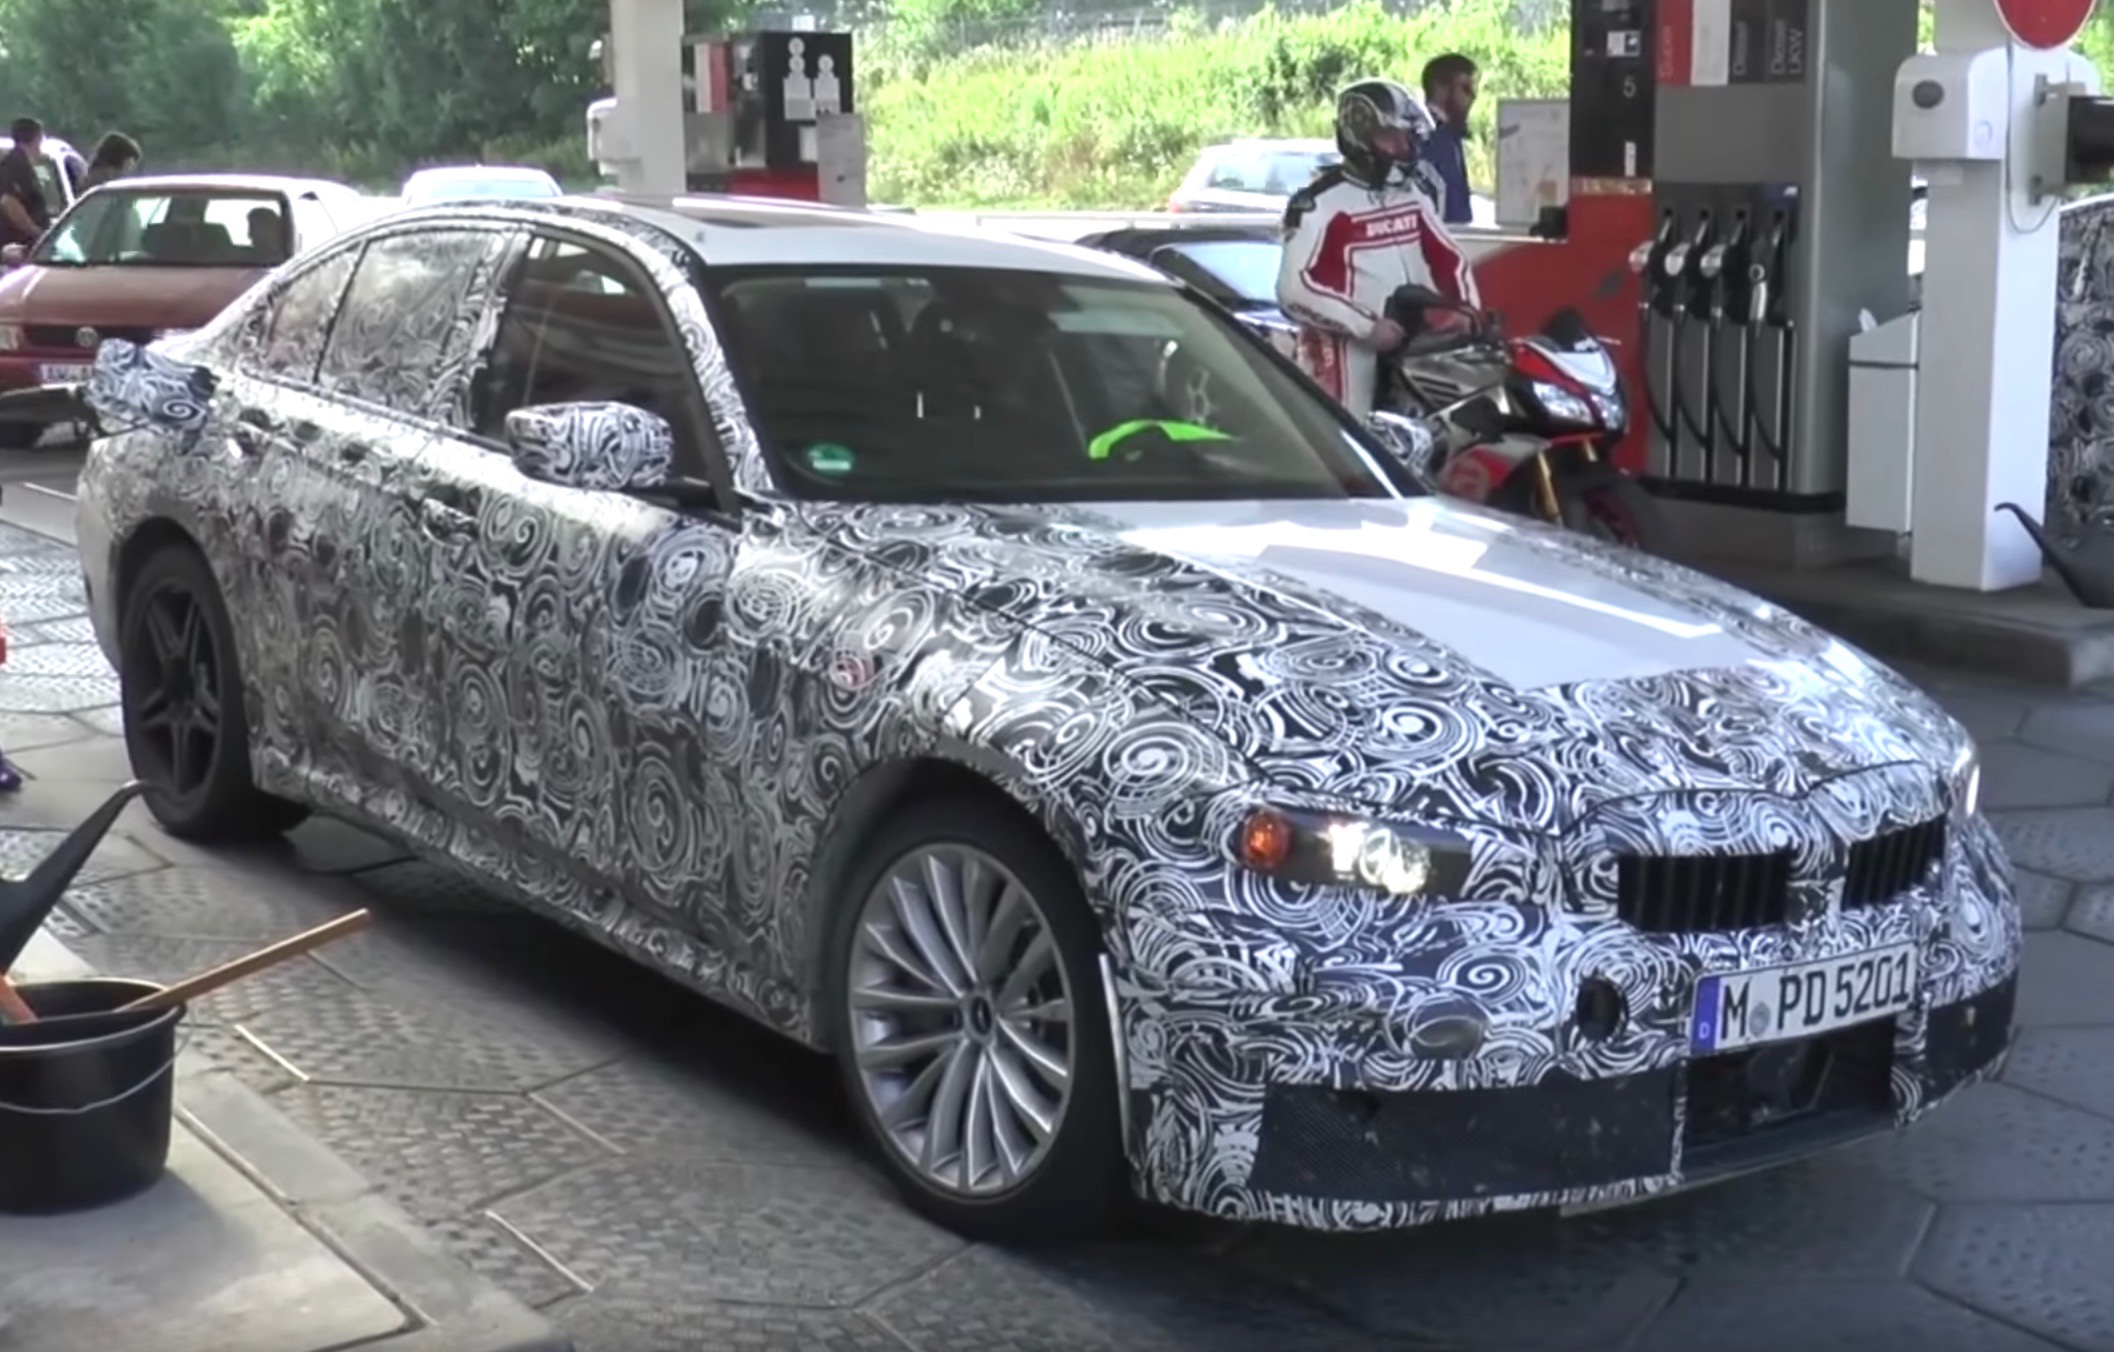 New BMW M3 to feature rear steering, retain S55 3.0TT inline six – report